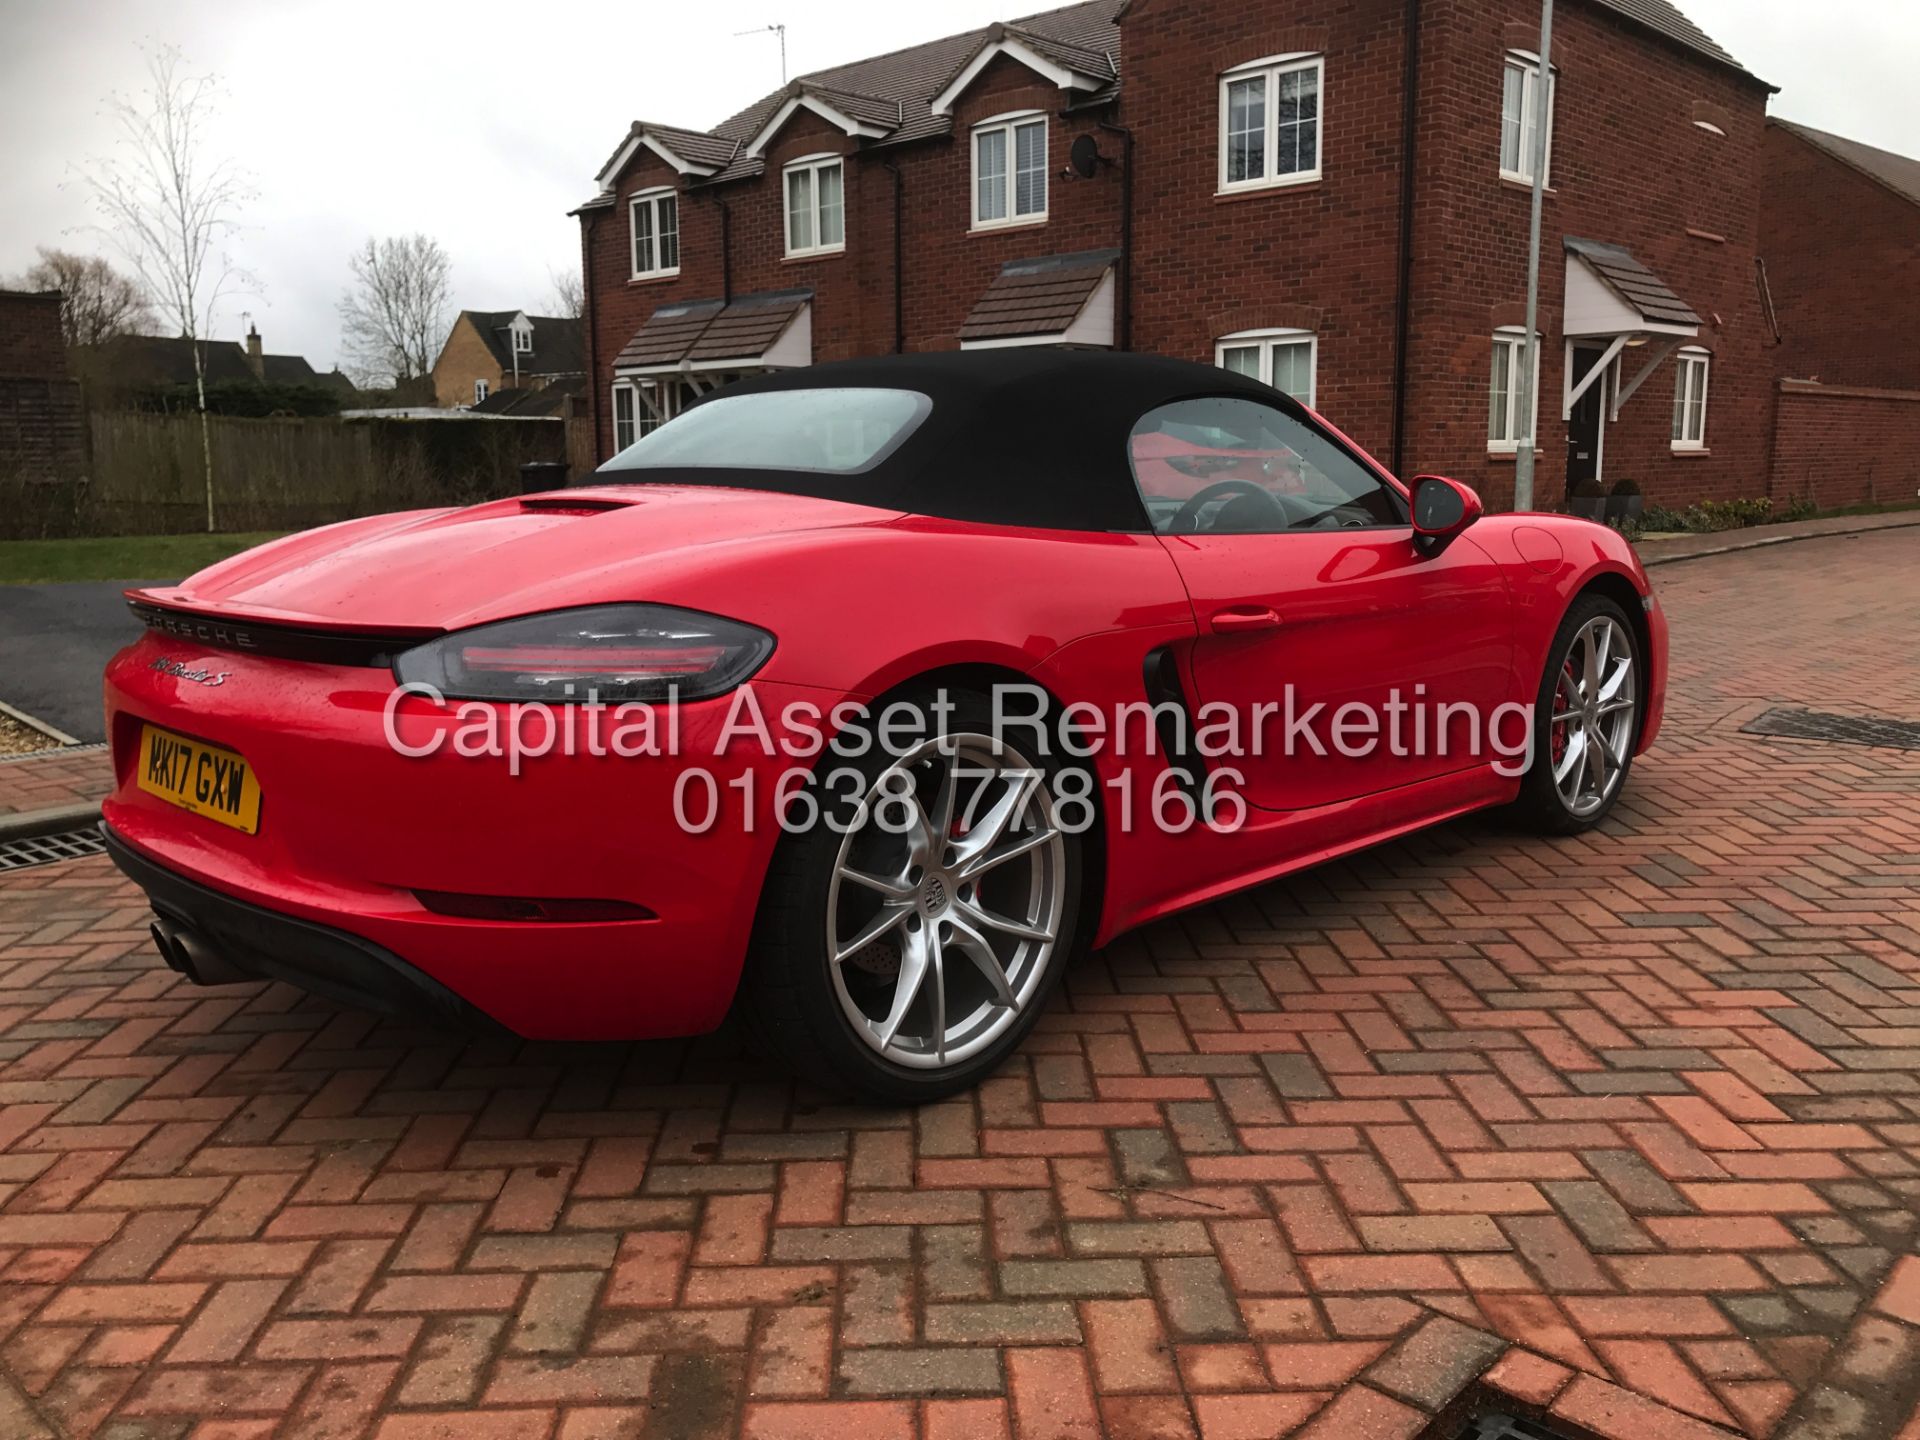 (ON SALE) PORSCHE BOXSTER S (718)CONVERTIBLE (17REG) NEW SHAPE-350 BHP-PDK AUTO' (1 OWNER-LOW MILES) - Image 18 of 34